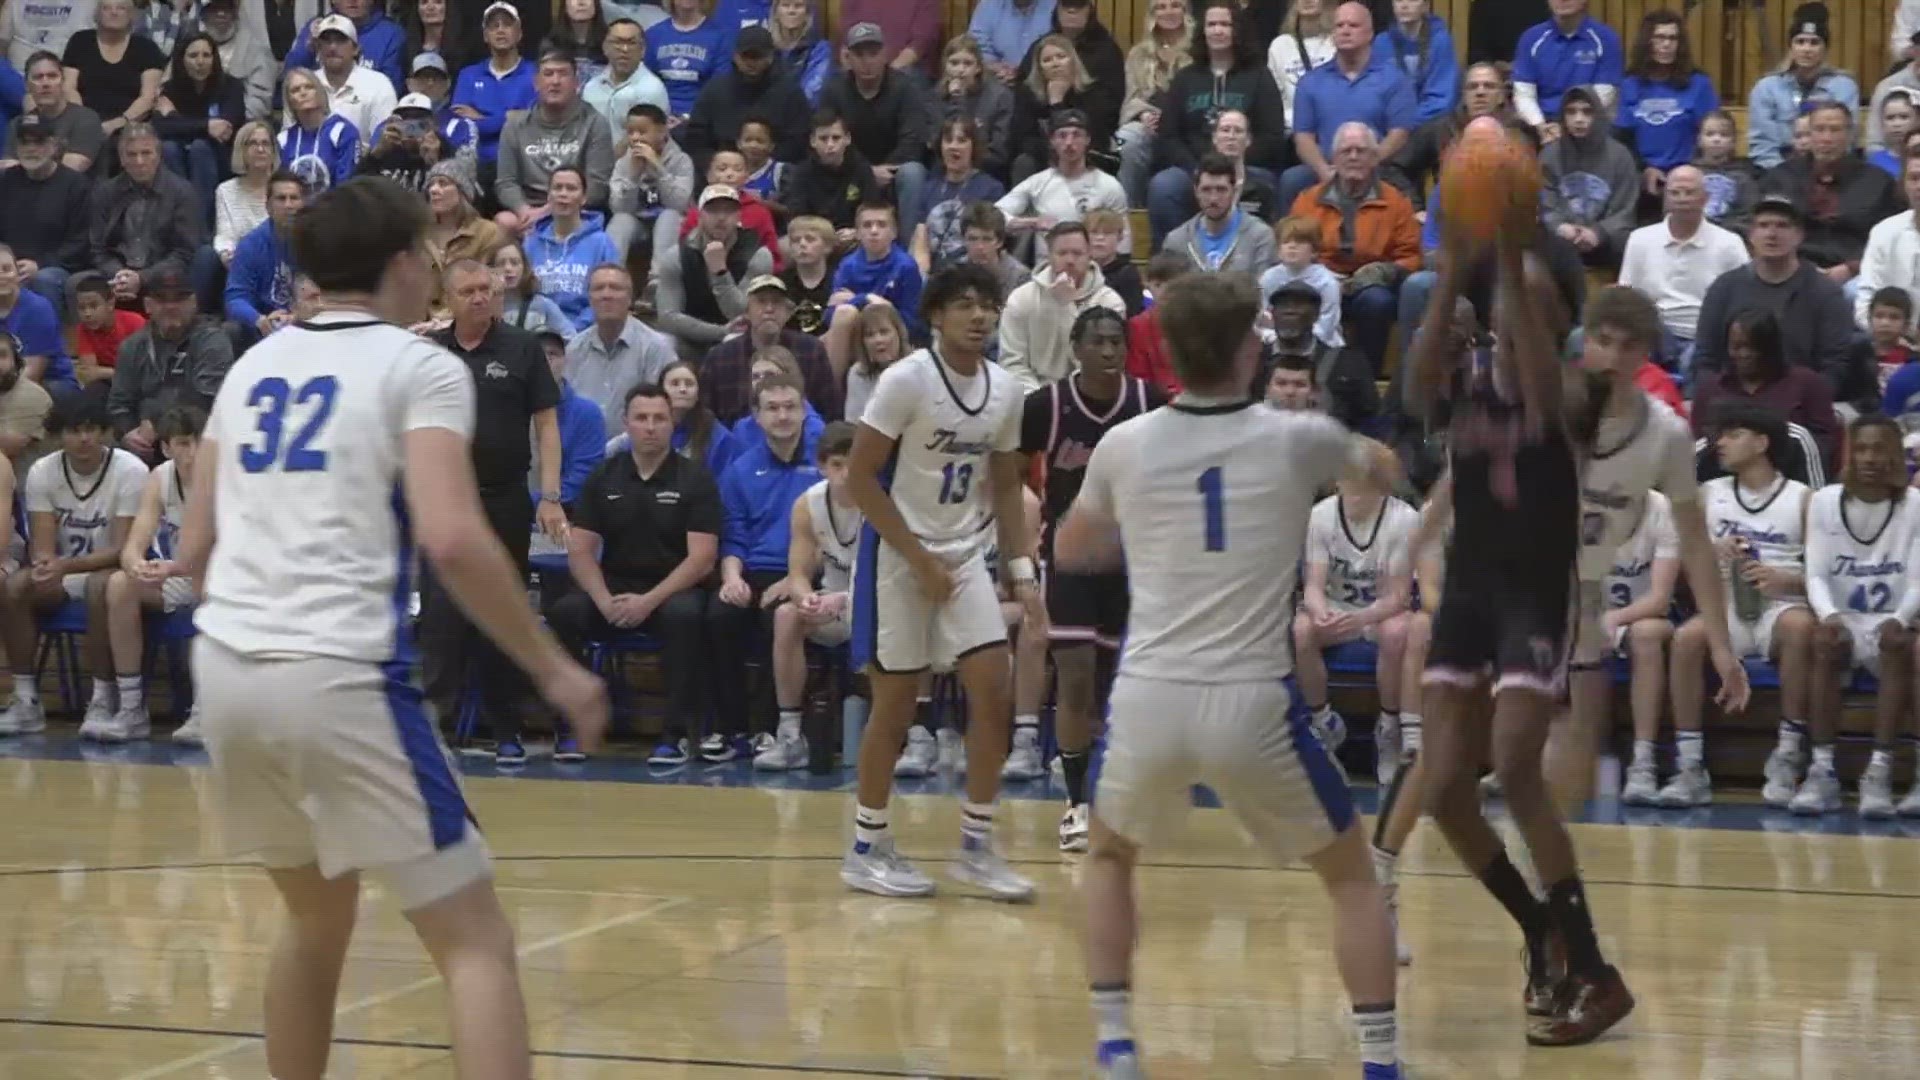 The Rocklin Thunder and the Lincoln Trojans clash in the semi-finals of the Sac Joaquin section playoffs.